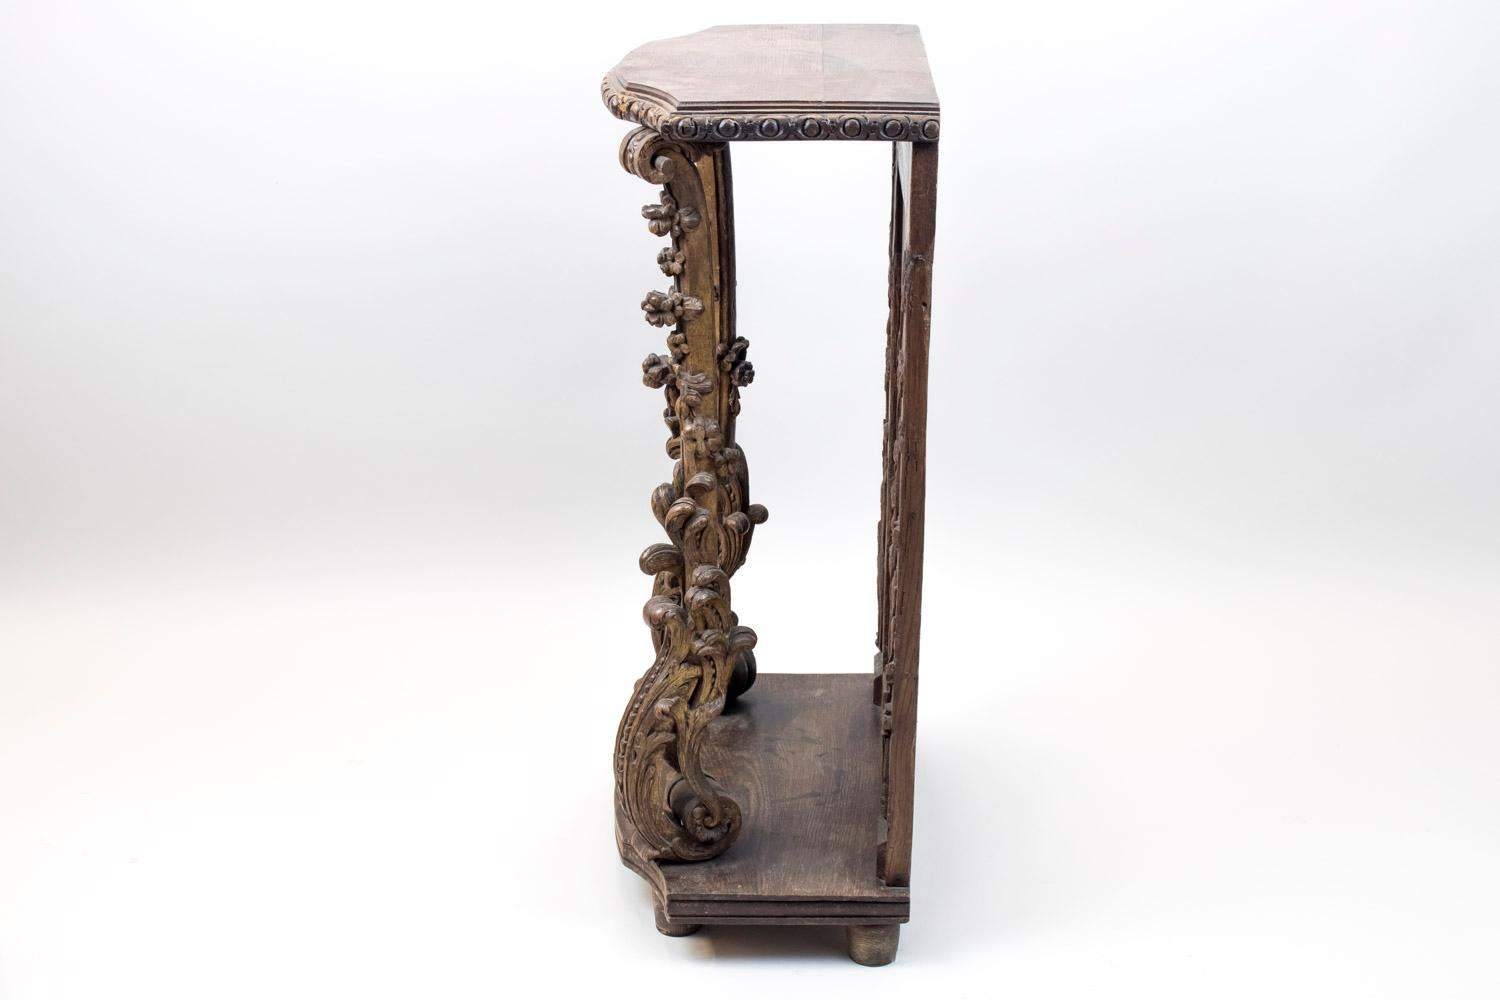 Small natural oak console-stand, composed of 18th century elements assembled during the 19th century. It standings on four small cylindrical legs supporting a molded chantourné tray. On top, two finely carved uprights decorated with swirls, acanthus